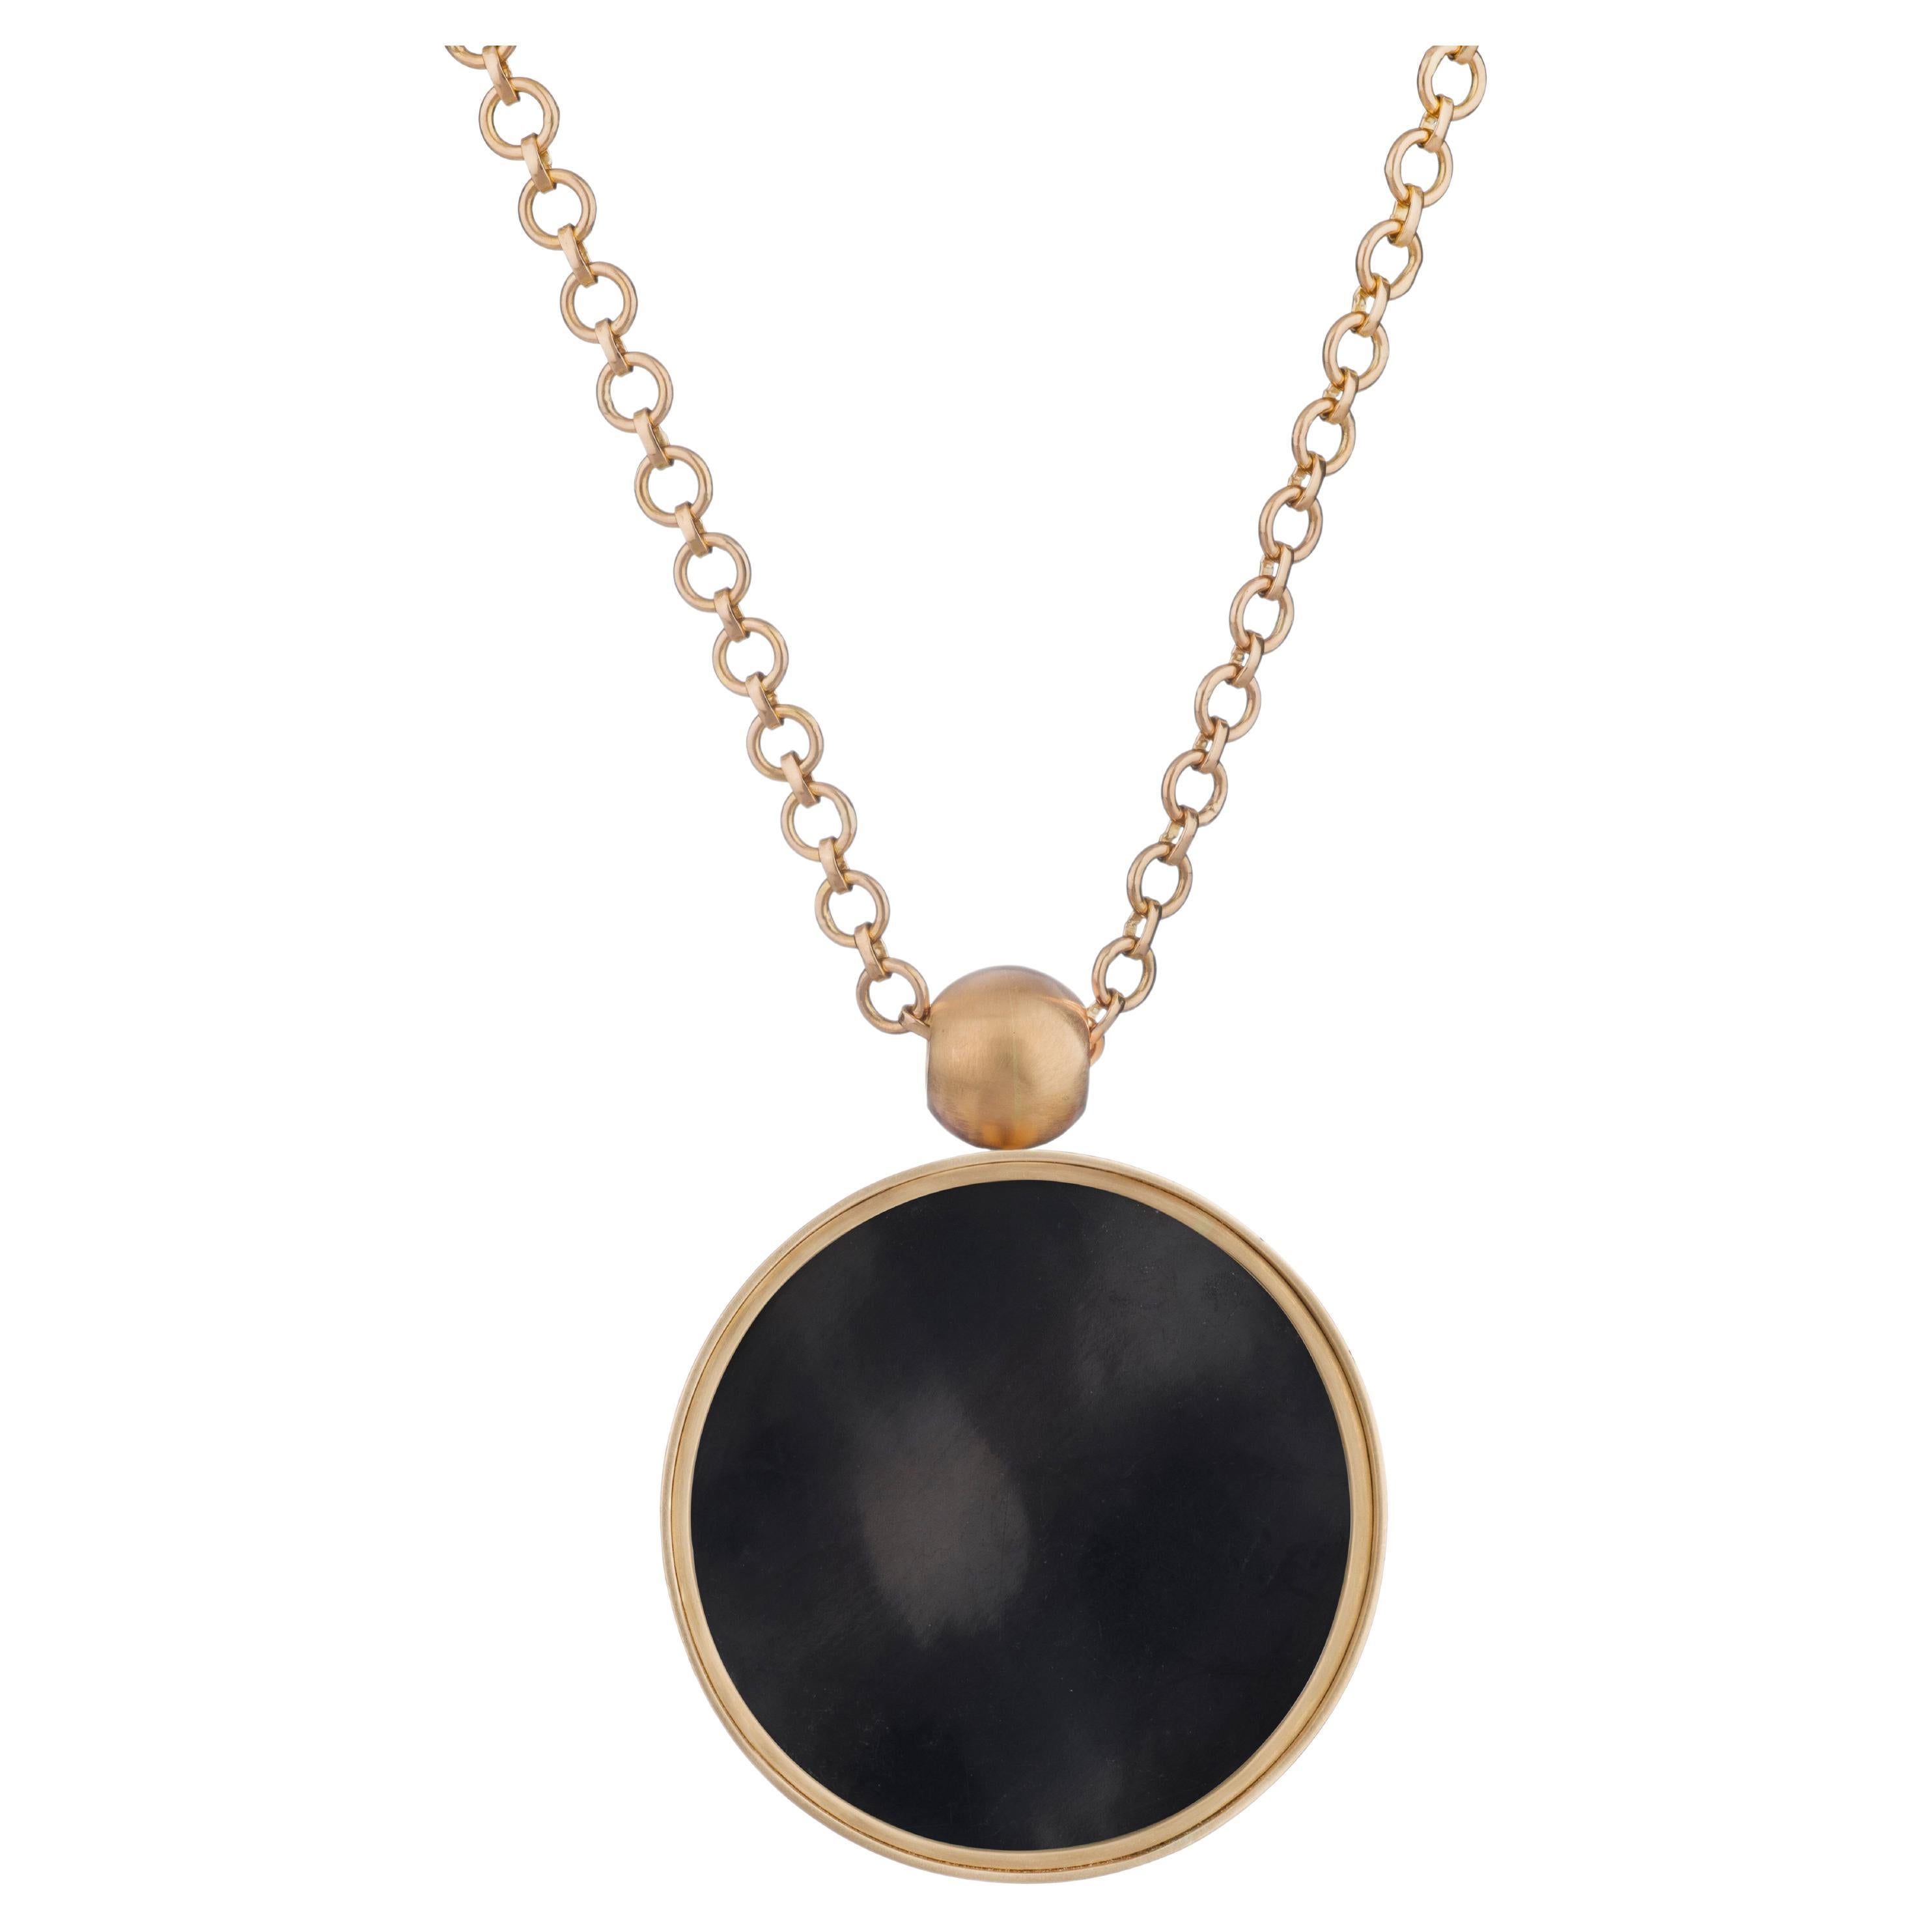 Ouroboros' 18kt Gold Black Shell and Mother of Pearl Pendant